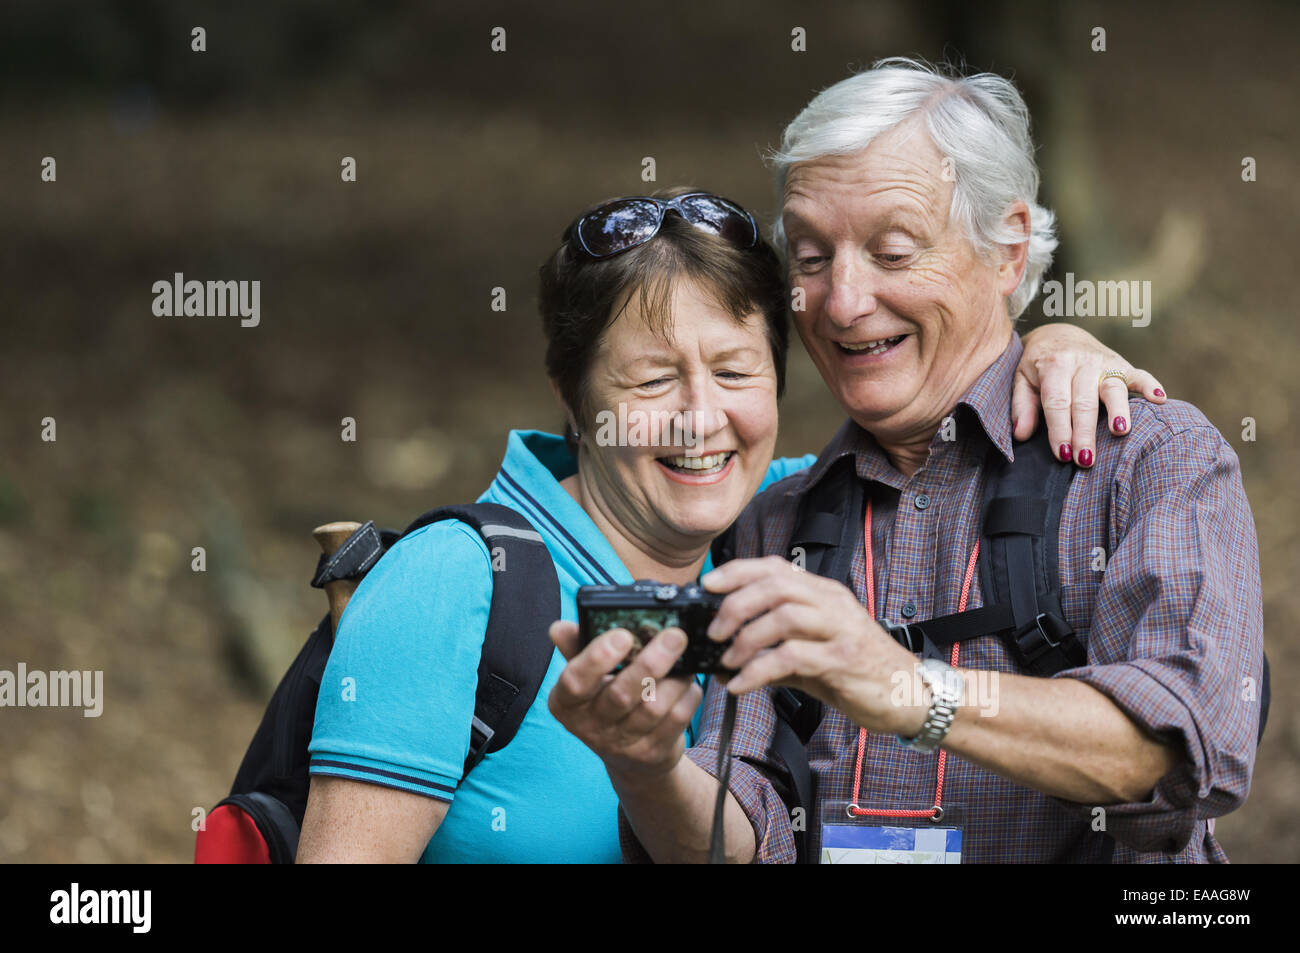 A mature couple looking at a digital camera, laughing. Stock Photo